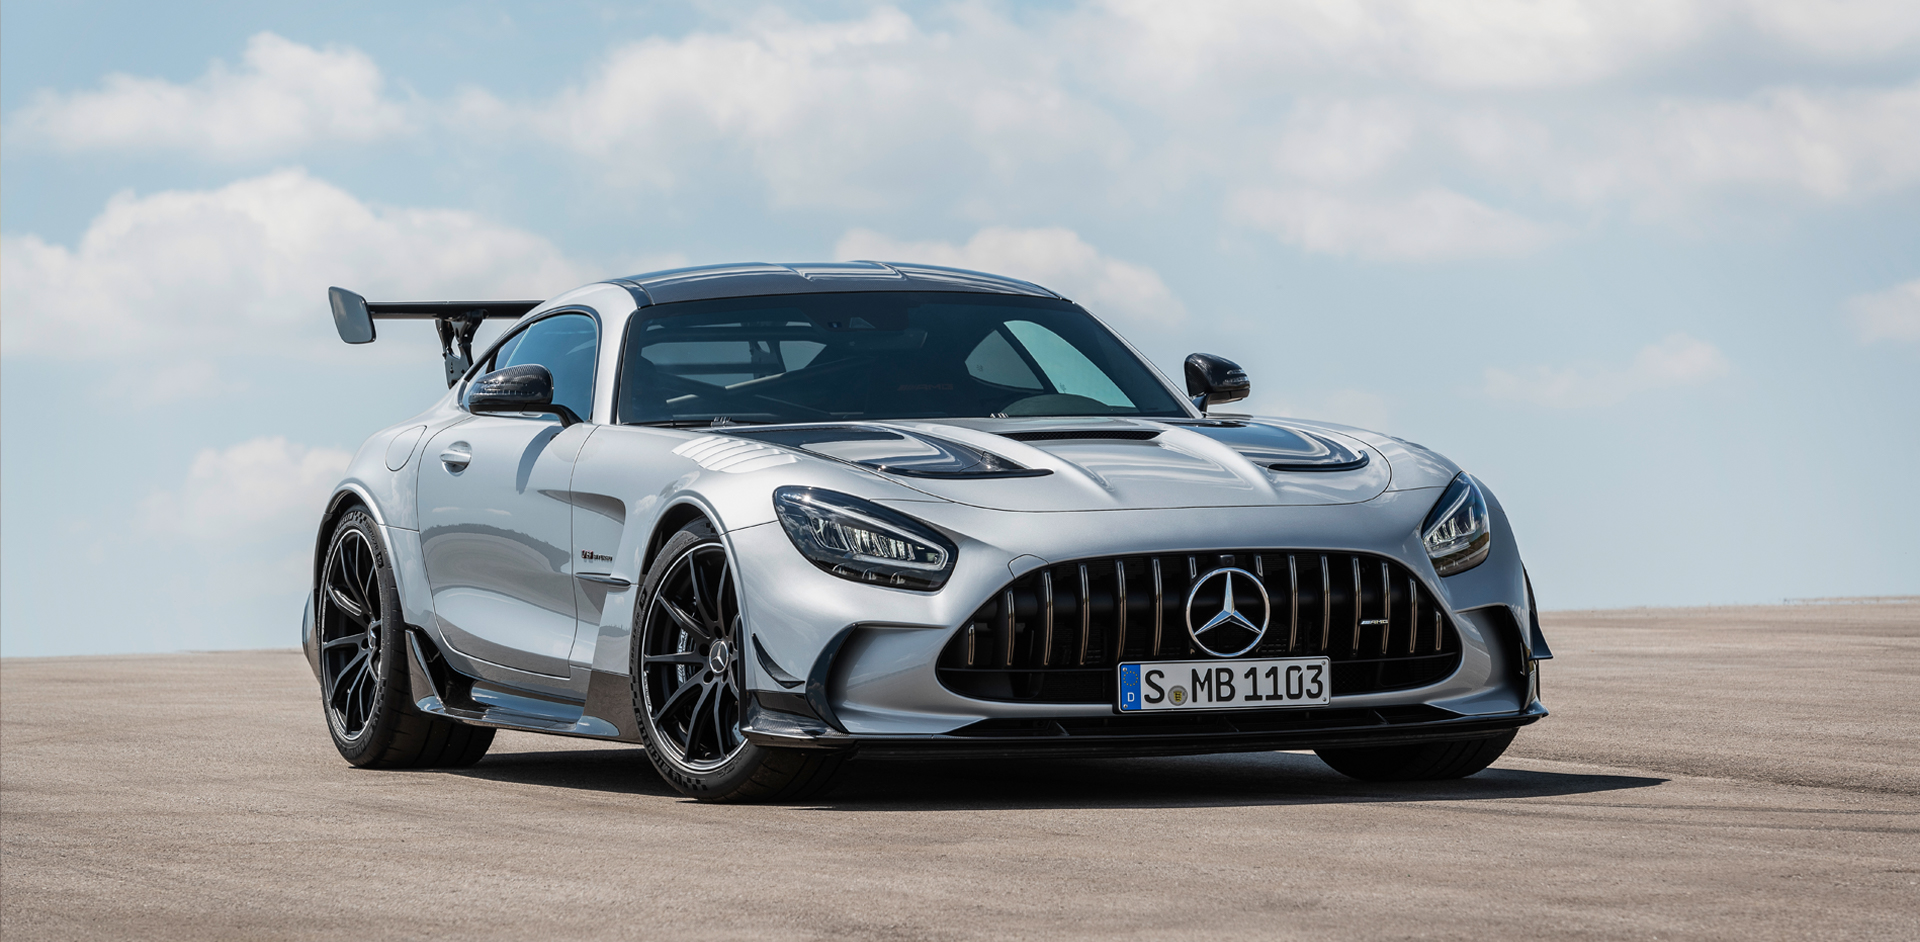 The new Mercedes-AMG GT Black Series